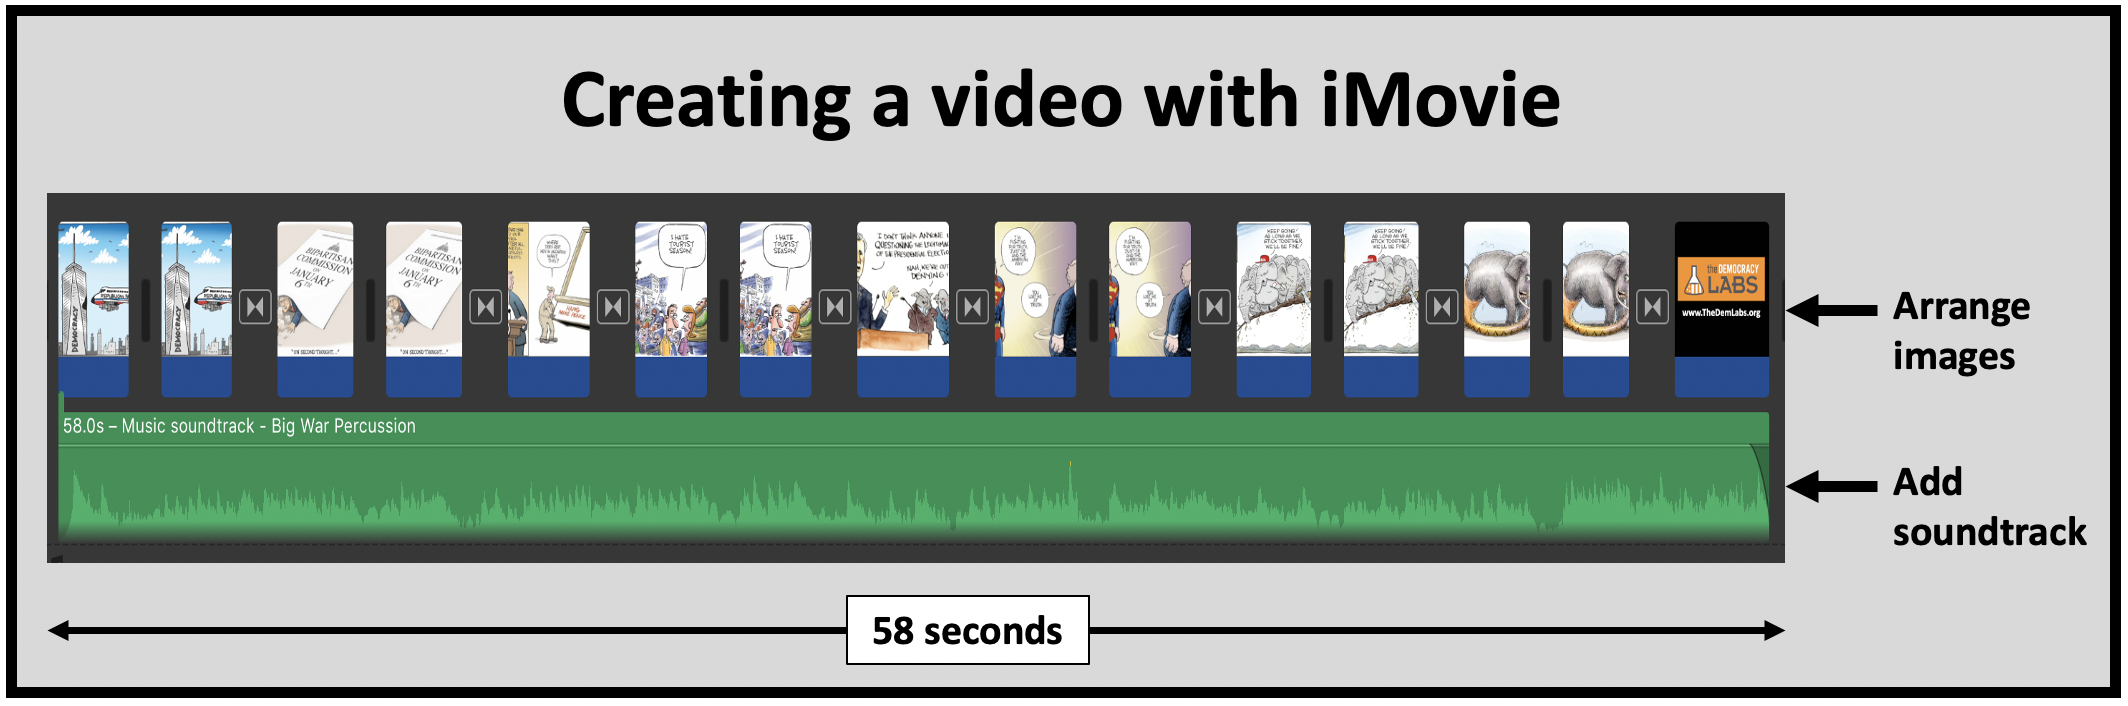 iMovie is a free app to create videos